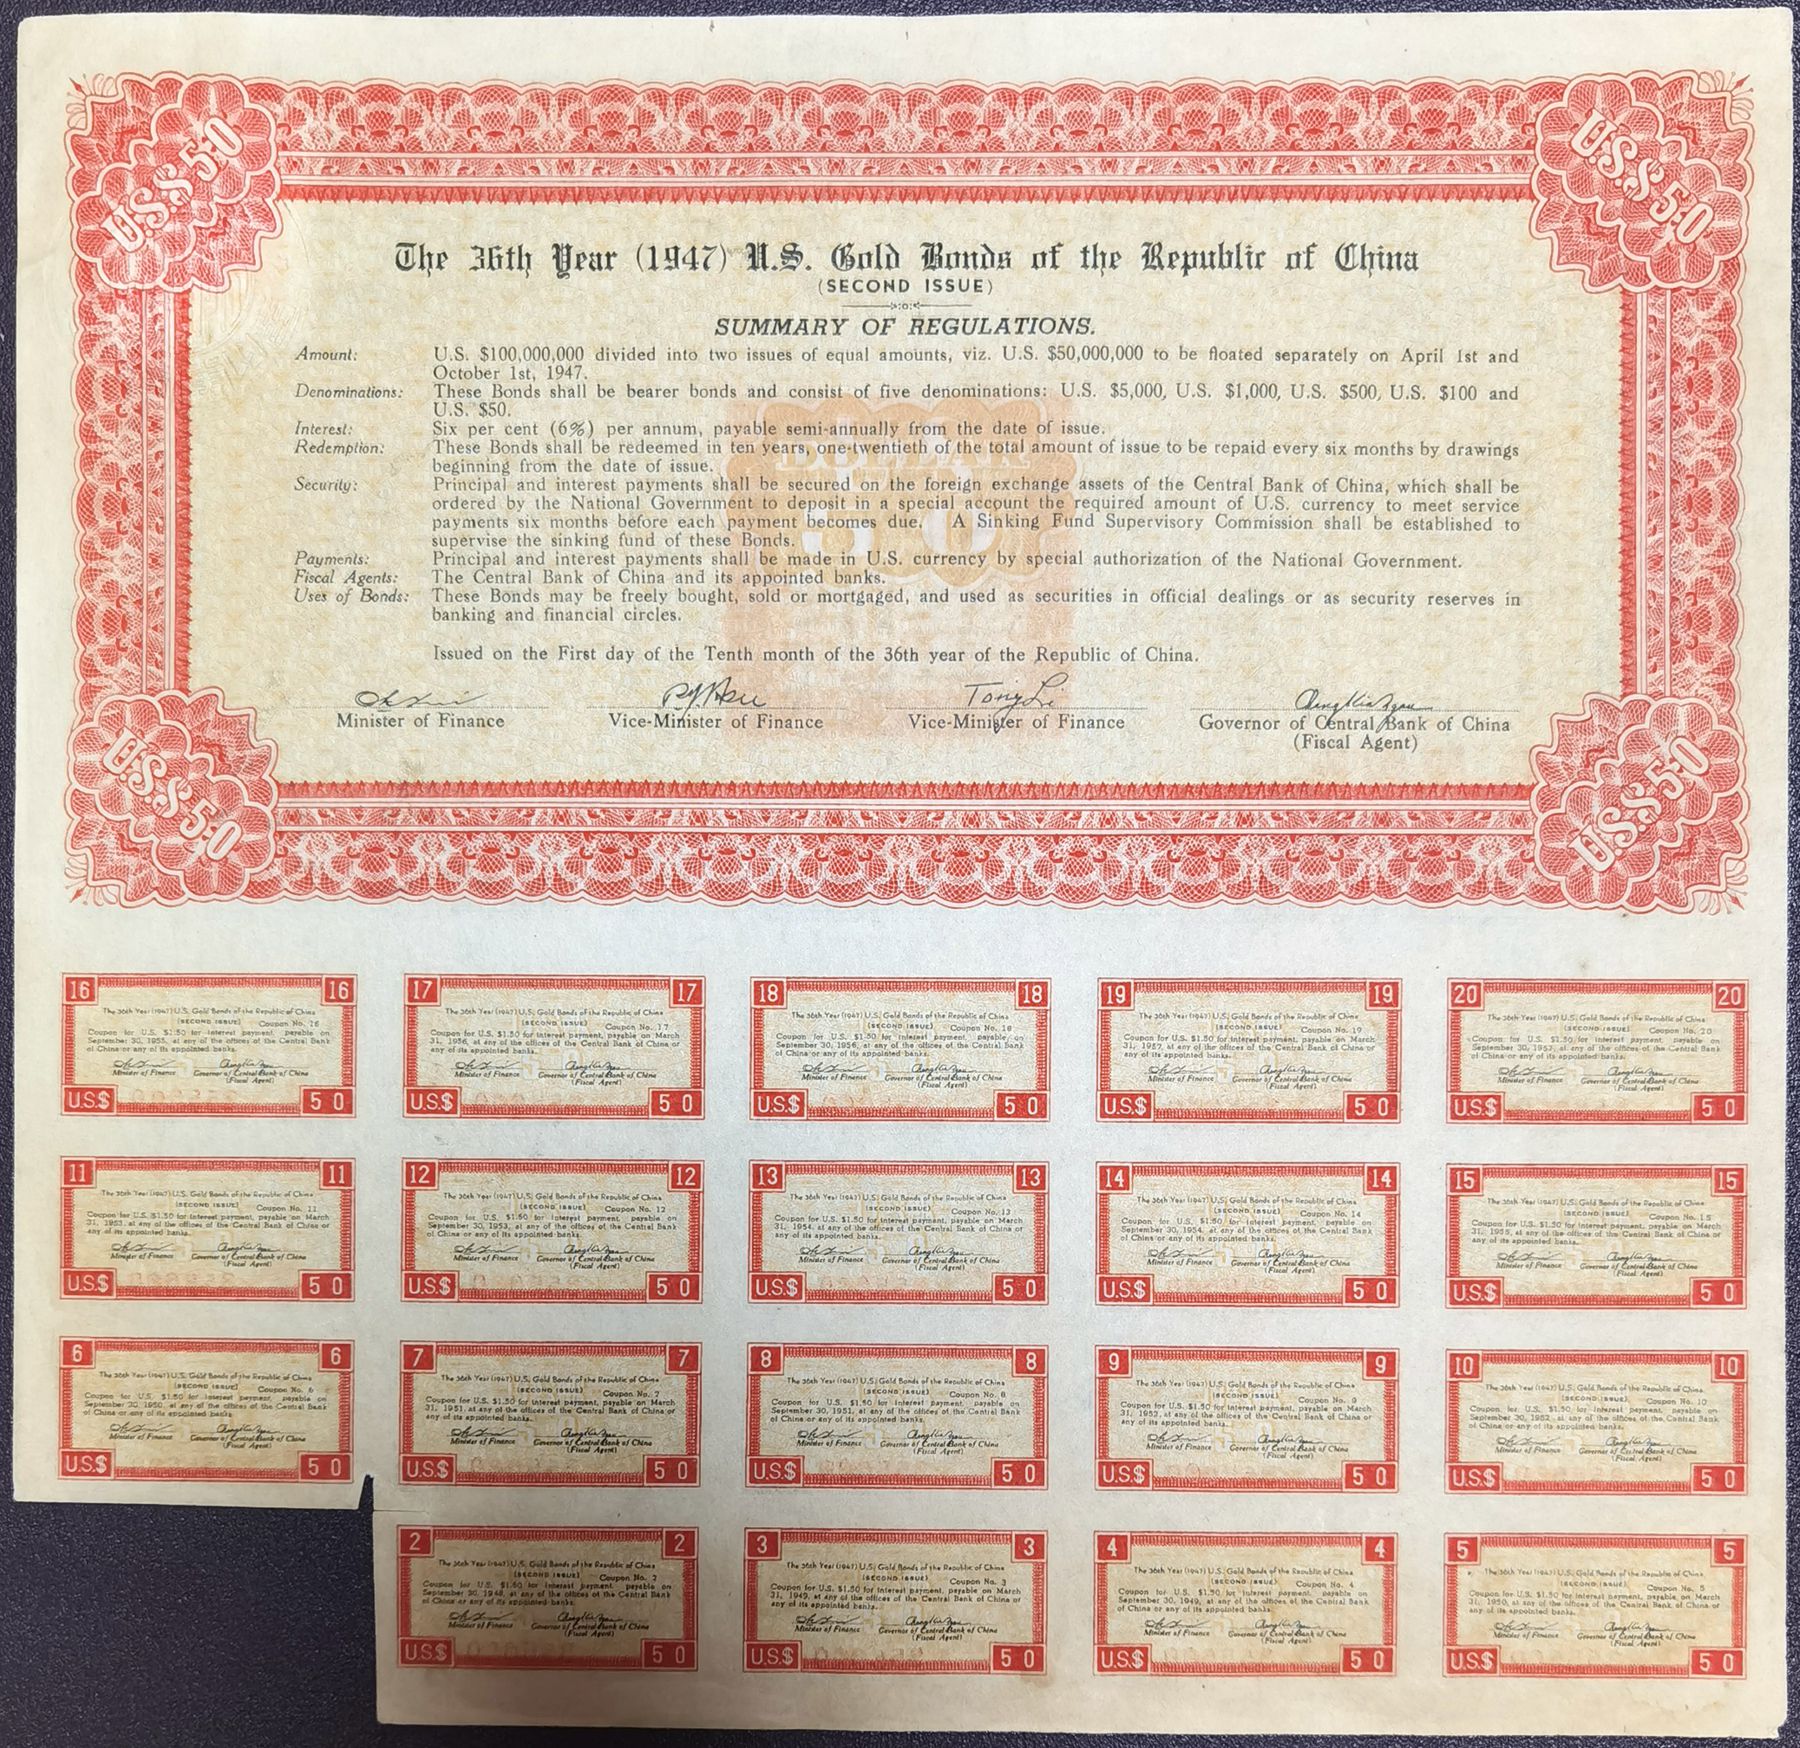 B2096, China 6% U.S.Gold Bond of 1947, USD 50 for Liberty (Second Issuing)